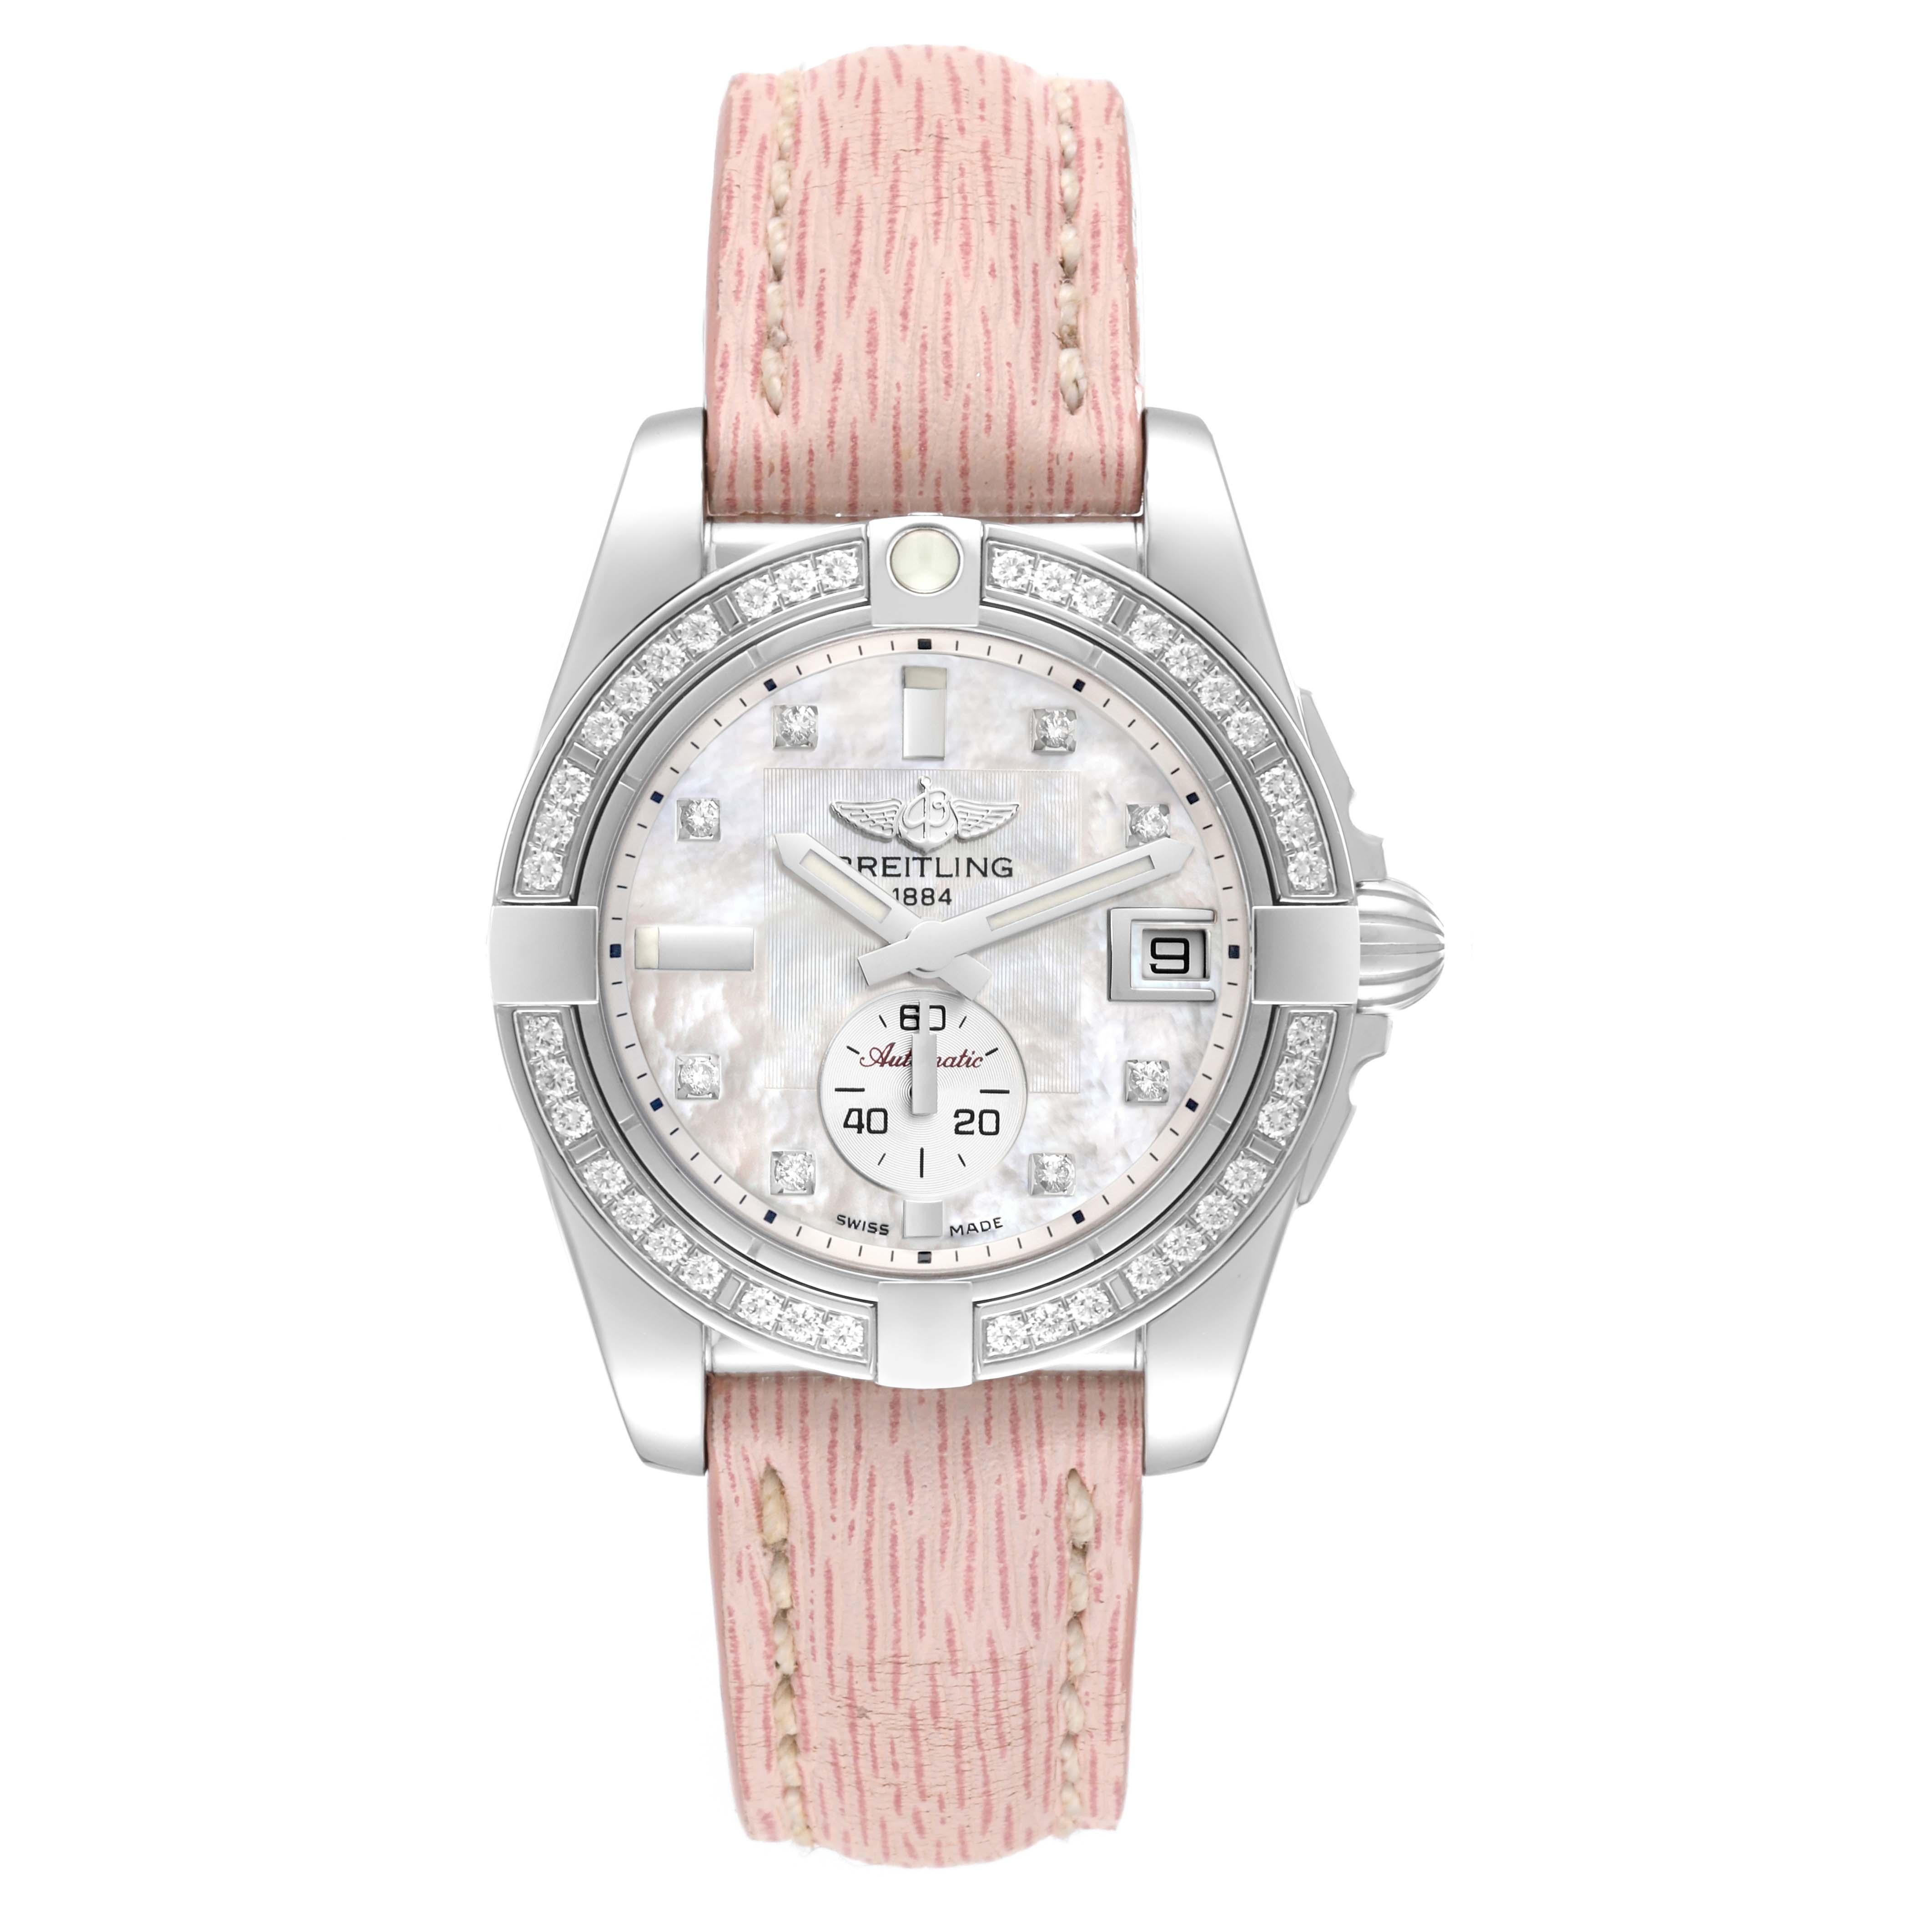 Breitling Galactic 36 Mother Of Pearl Dial Diamond Steel Ladies Watch A37330 Box Card. Automatic self-winding movement. Stainless steel case 36.0 mm in diameter. Original Breitling factory diamond unidirectional rotating bezel. Four 15 minute